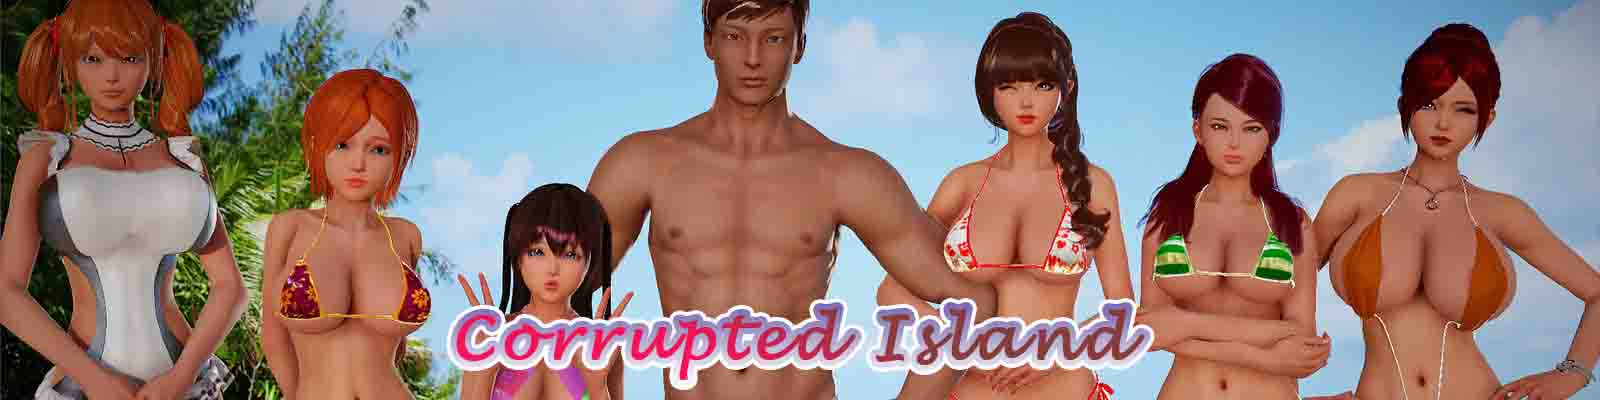 Corrupted Island 3d sex game, porn game, xxx game